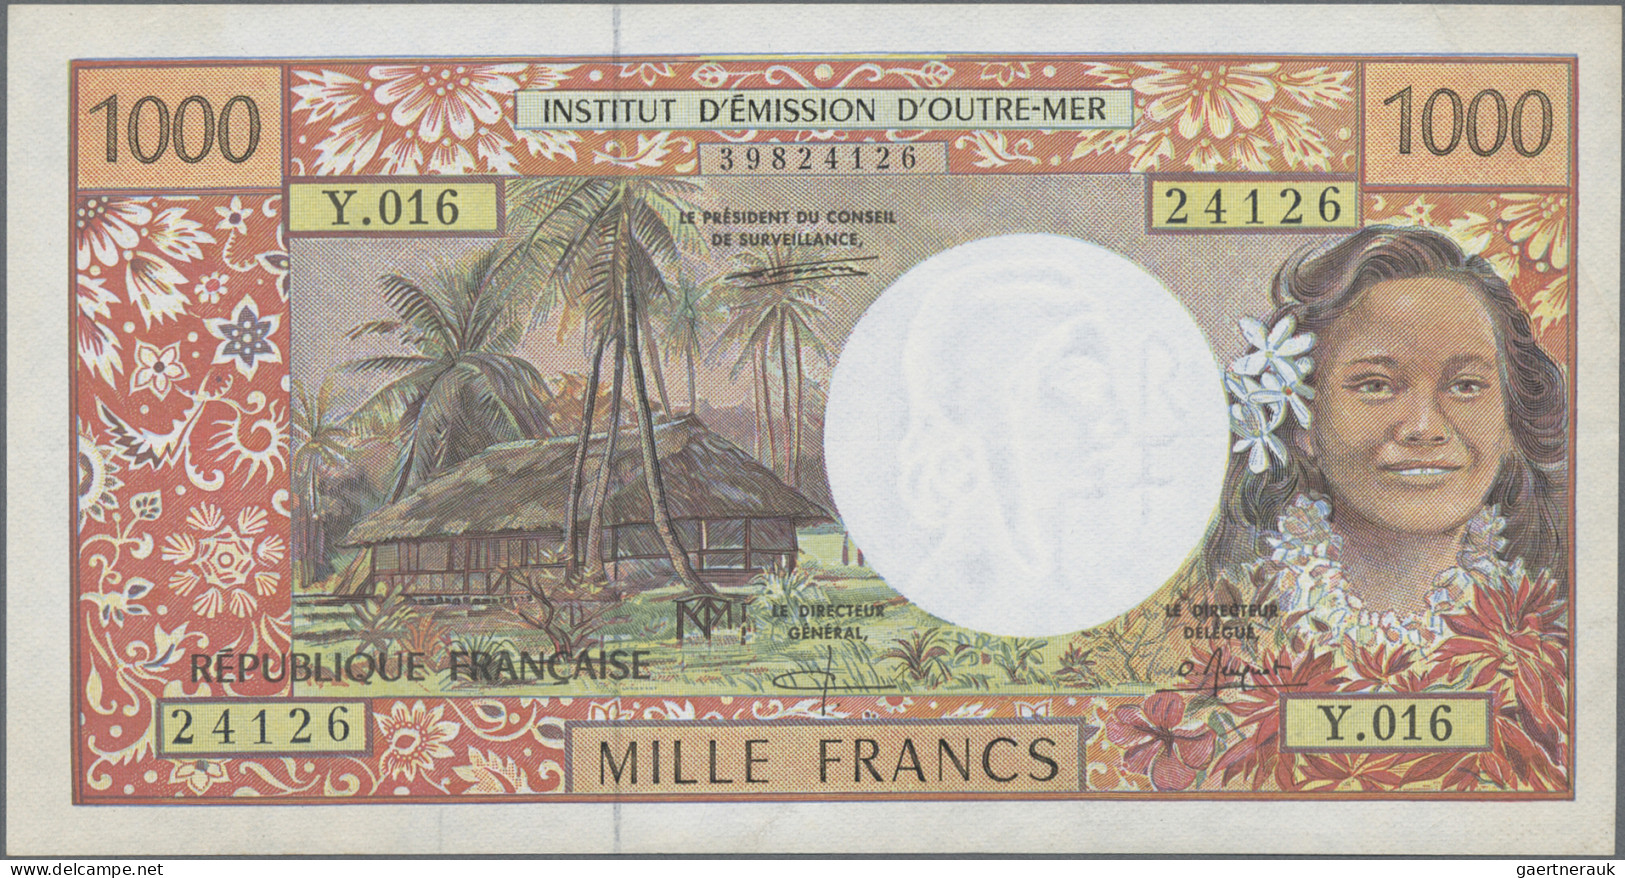 French Pacific Territories: Institut d'Émission d'Outre-Mer, lot with 6 banknote